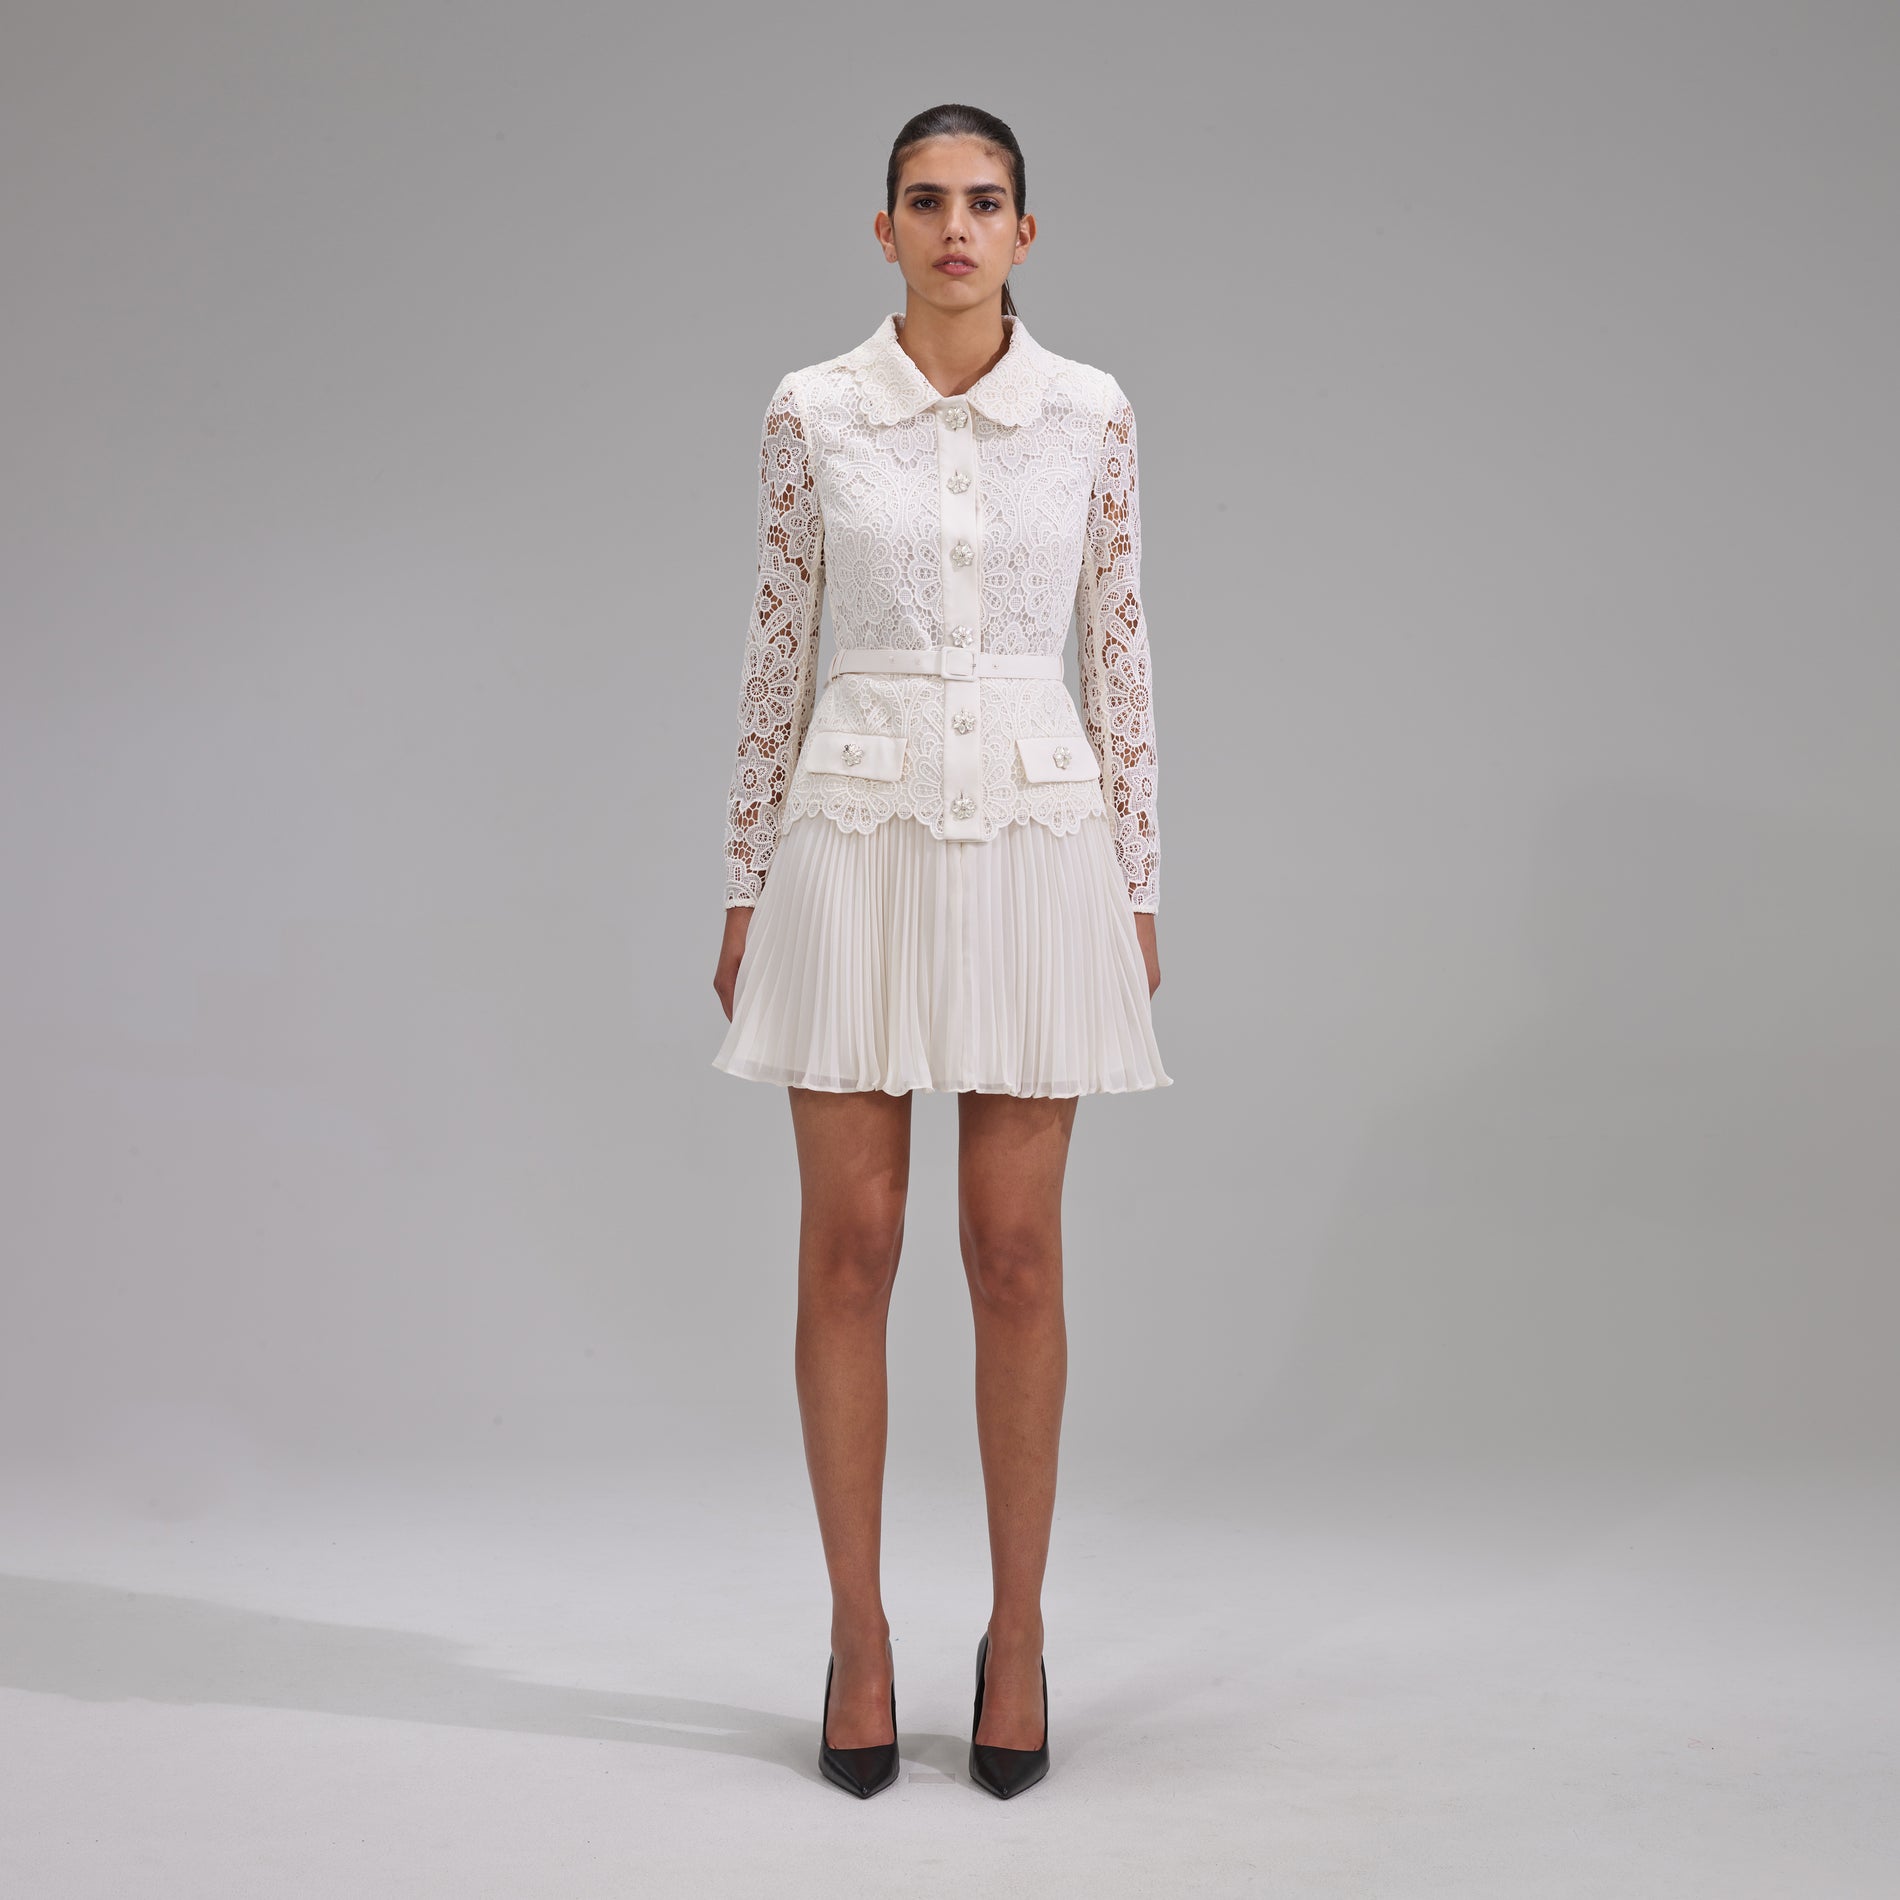 A woman wearing the Ivory Floral Motif Guipure Mini Dress